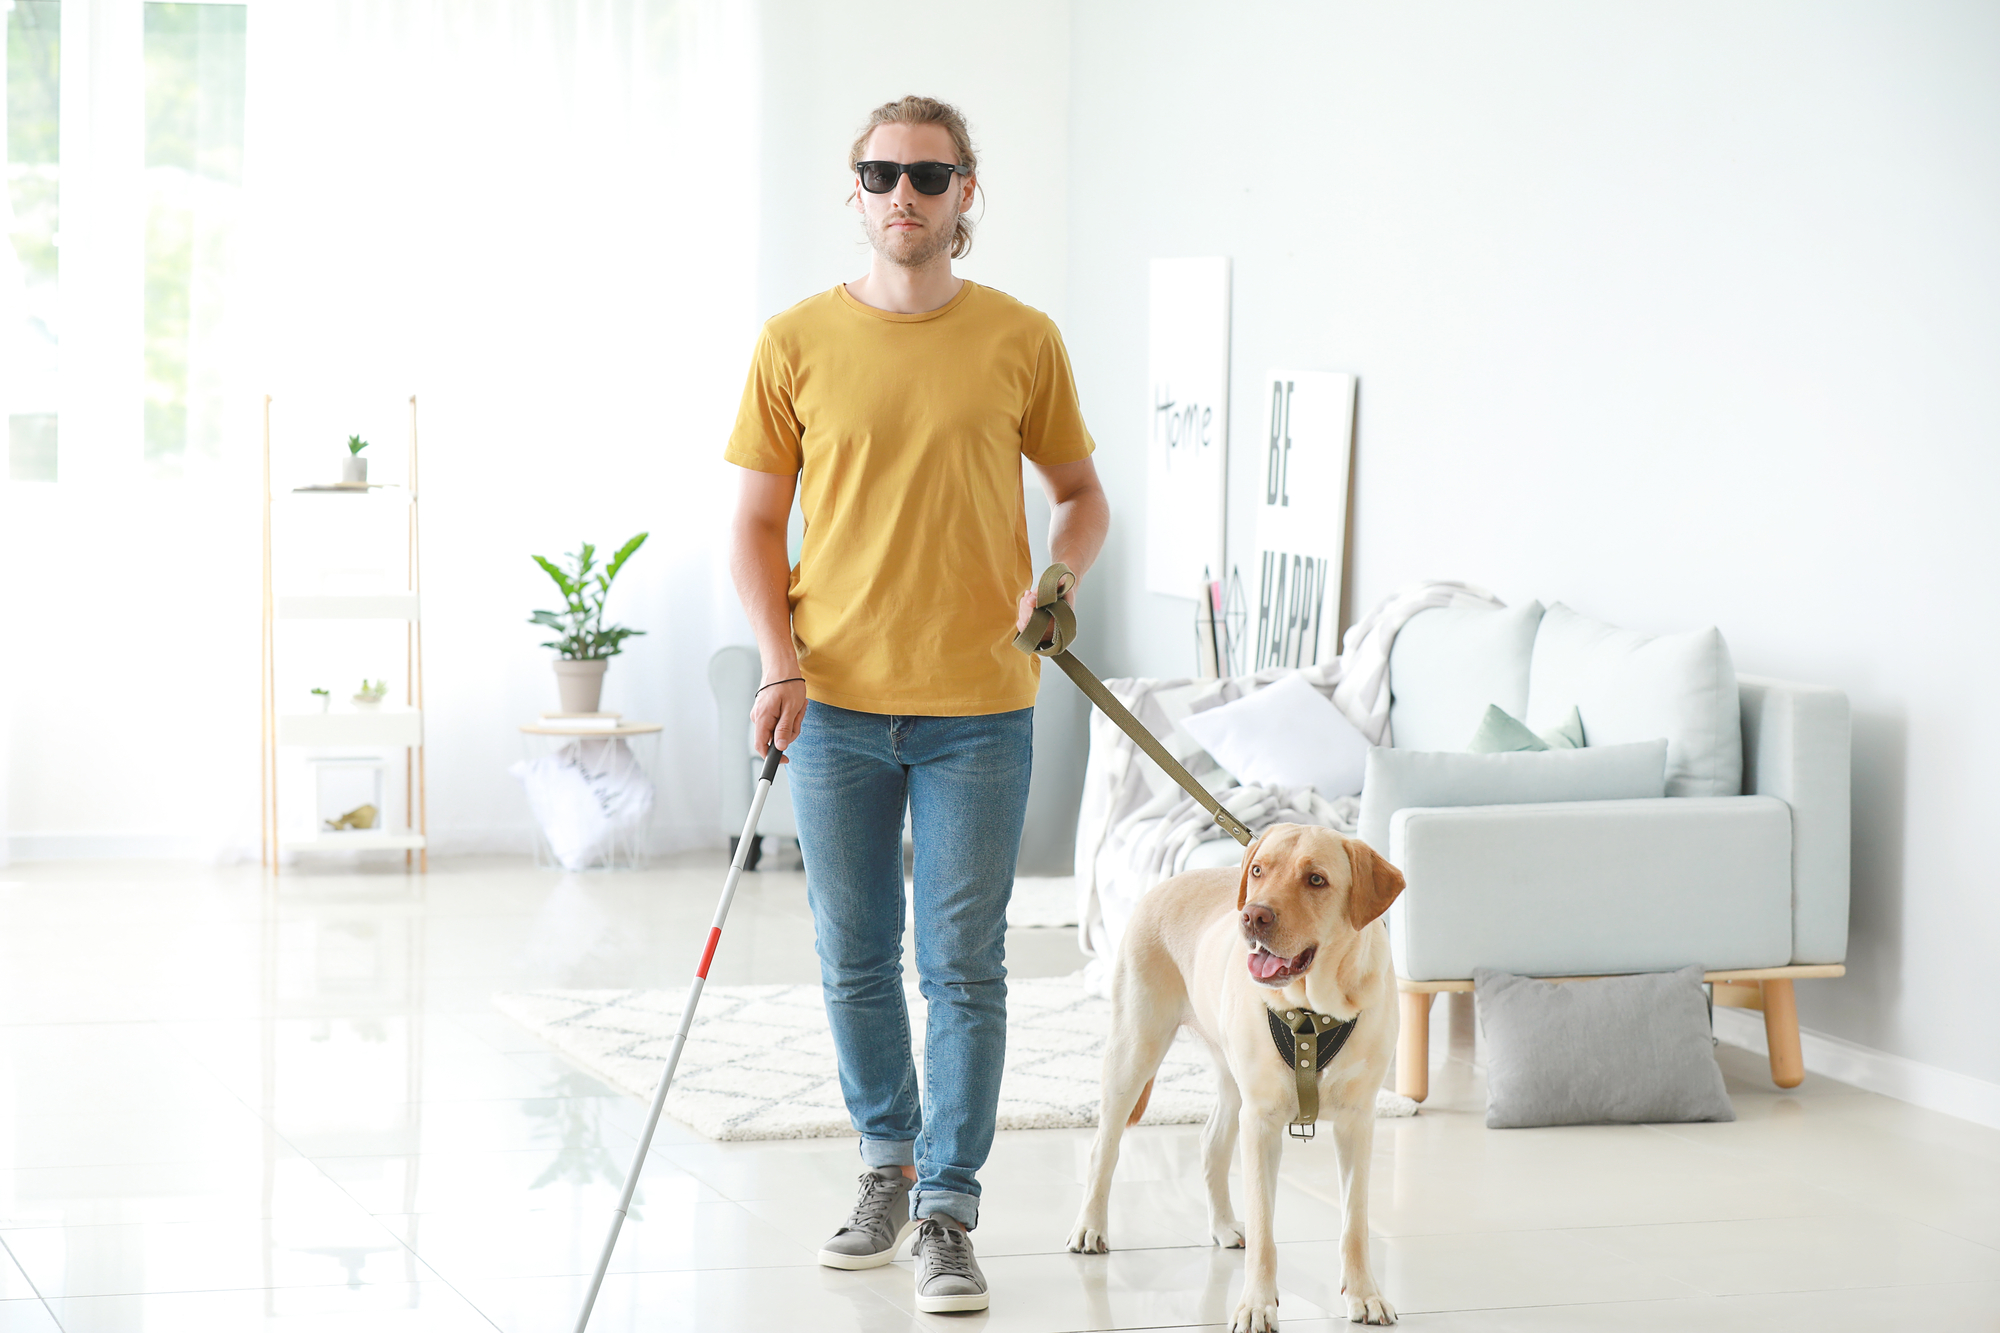 Blind young man with guide dog at home, Hampton Hampton property management